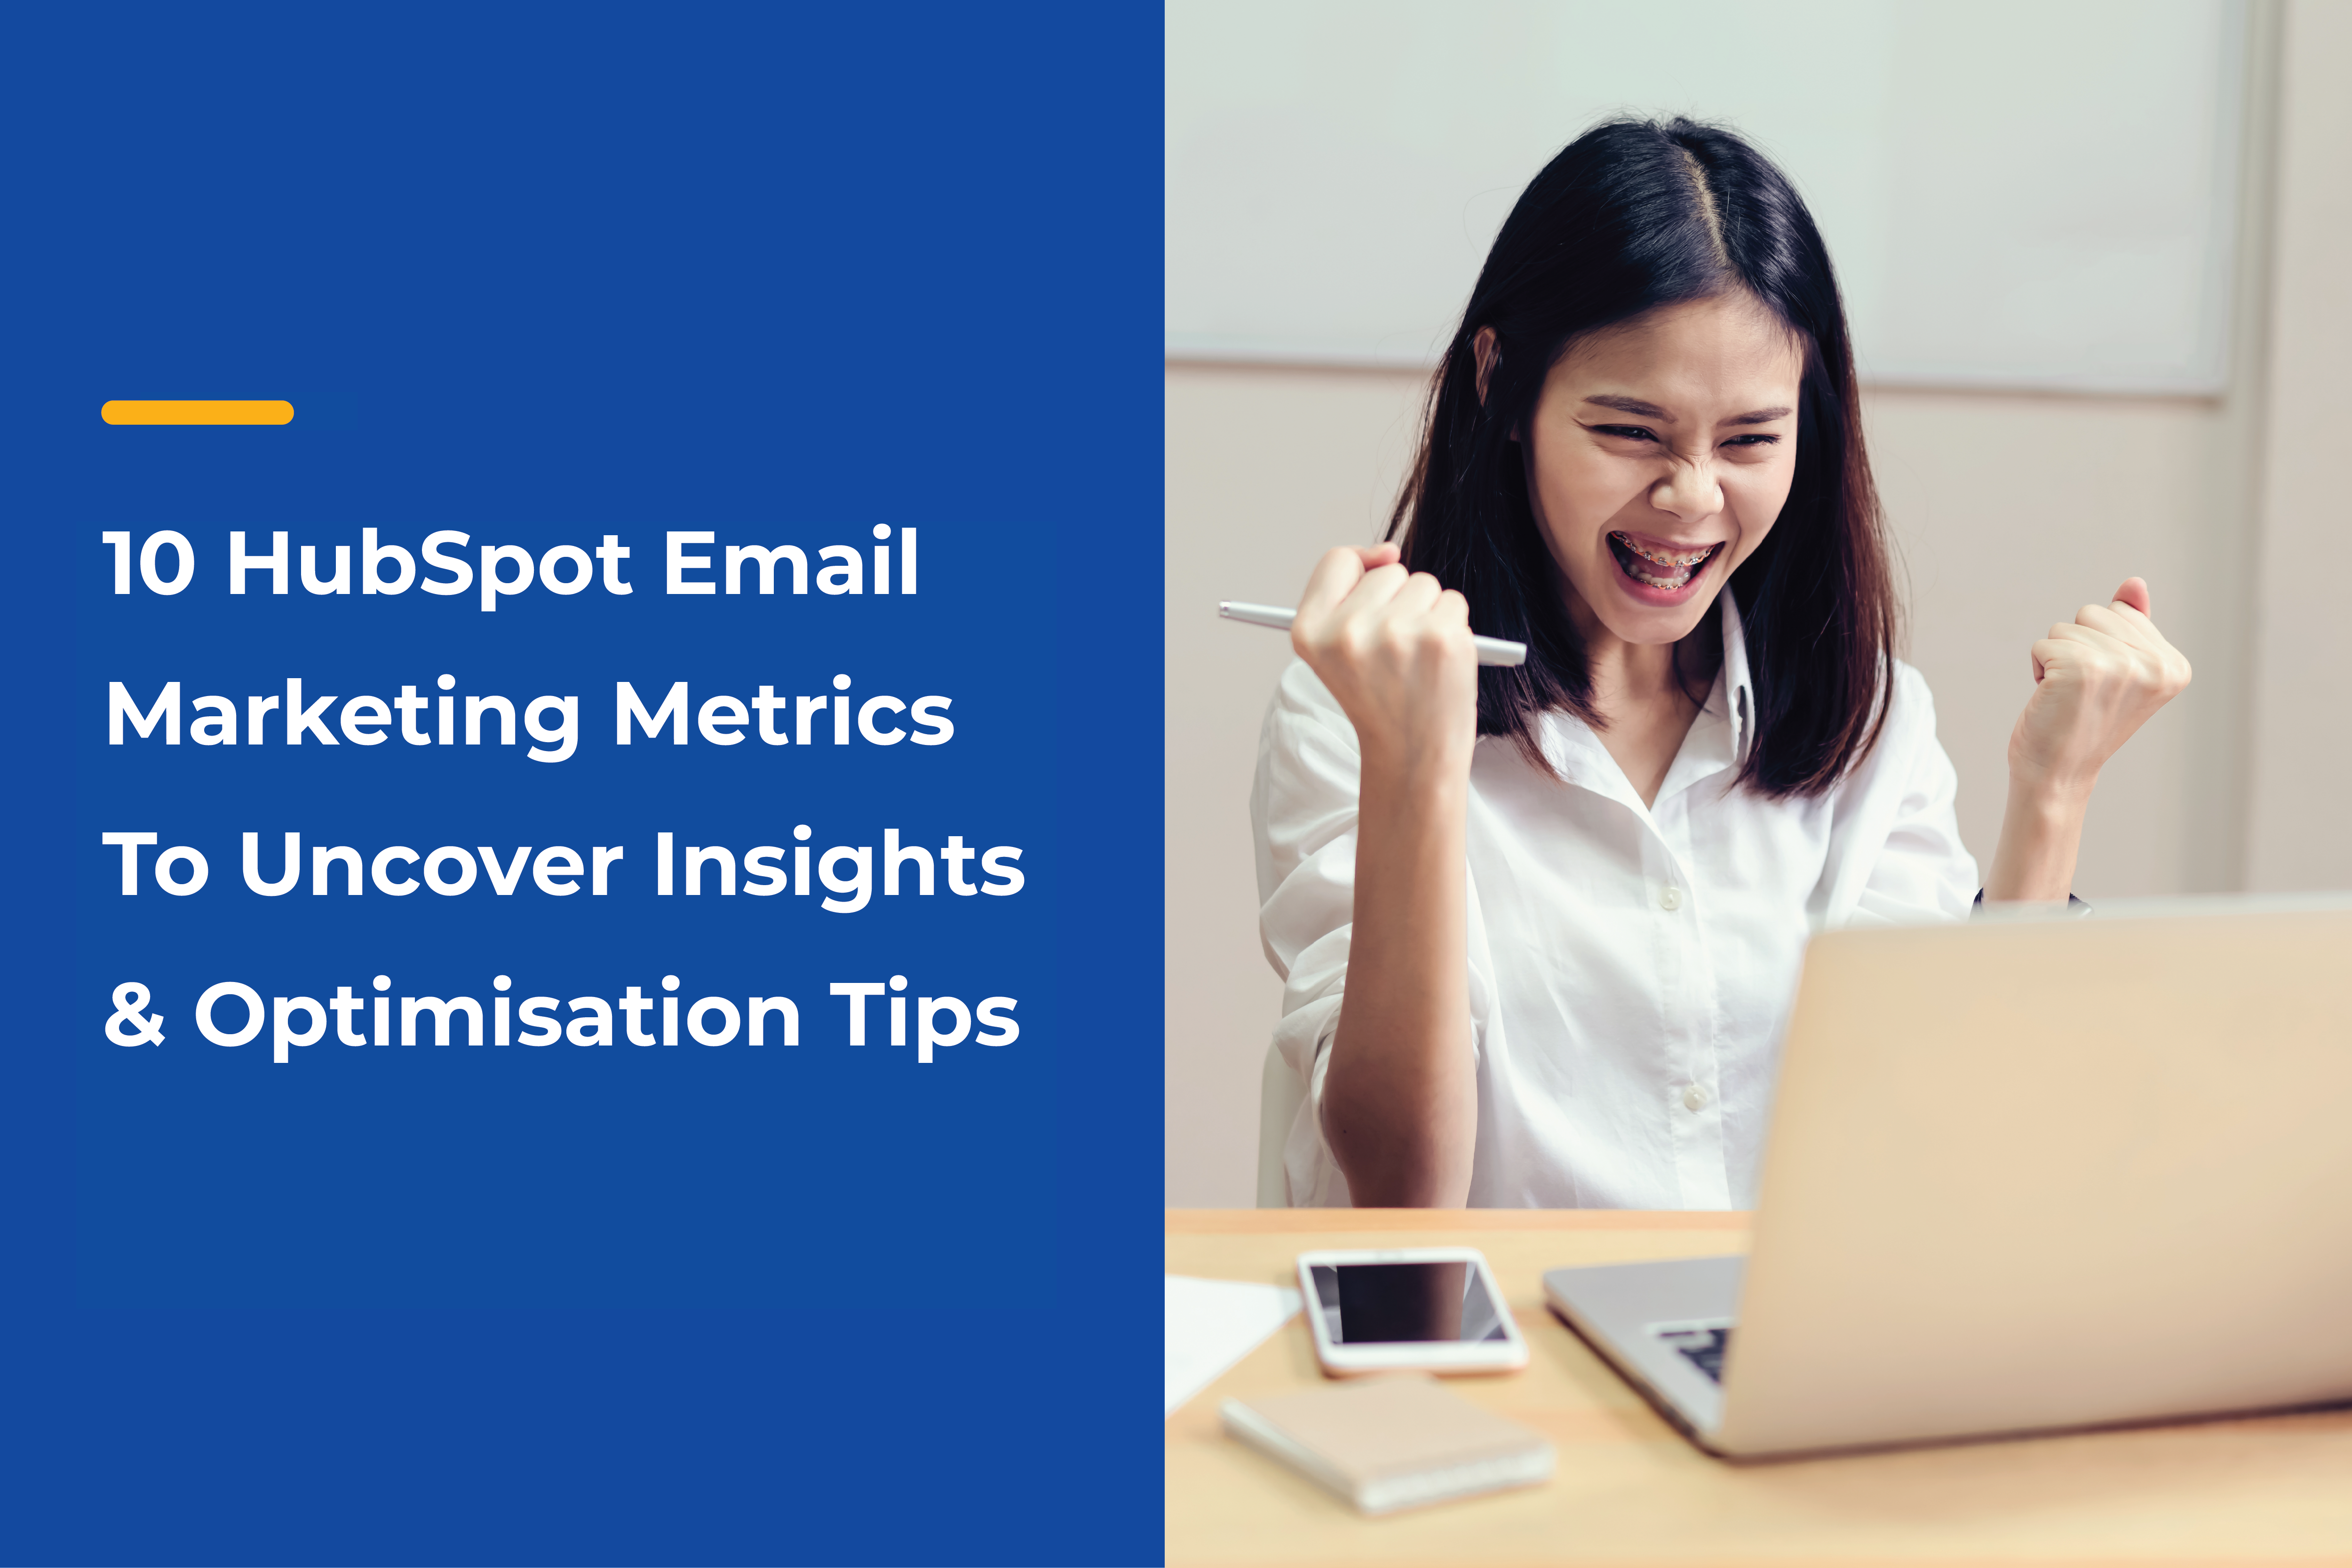 10 HubSpot Email Marketing Metrics To Uncover Insights & Optimisation Tips